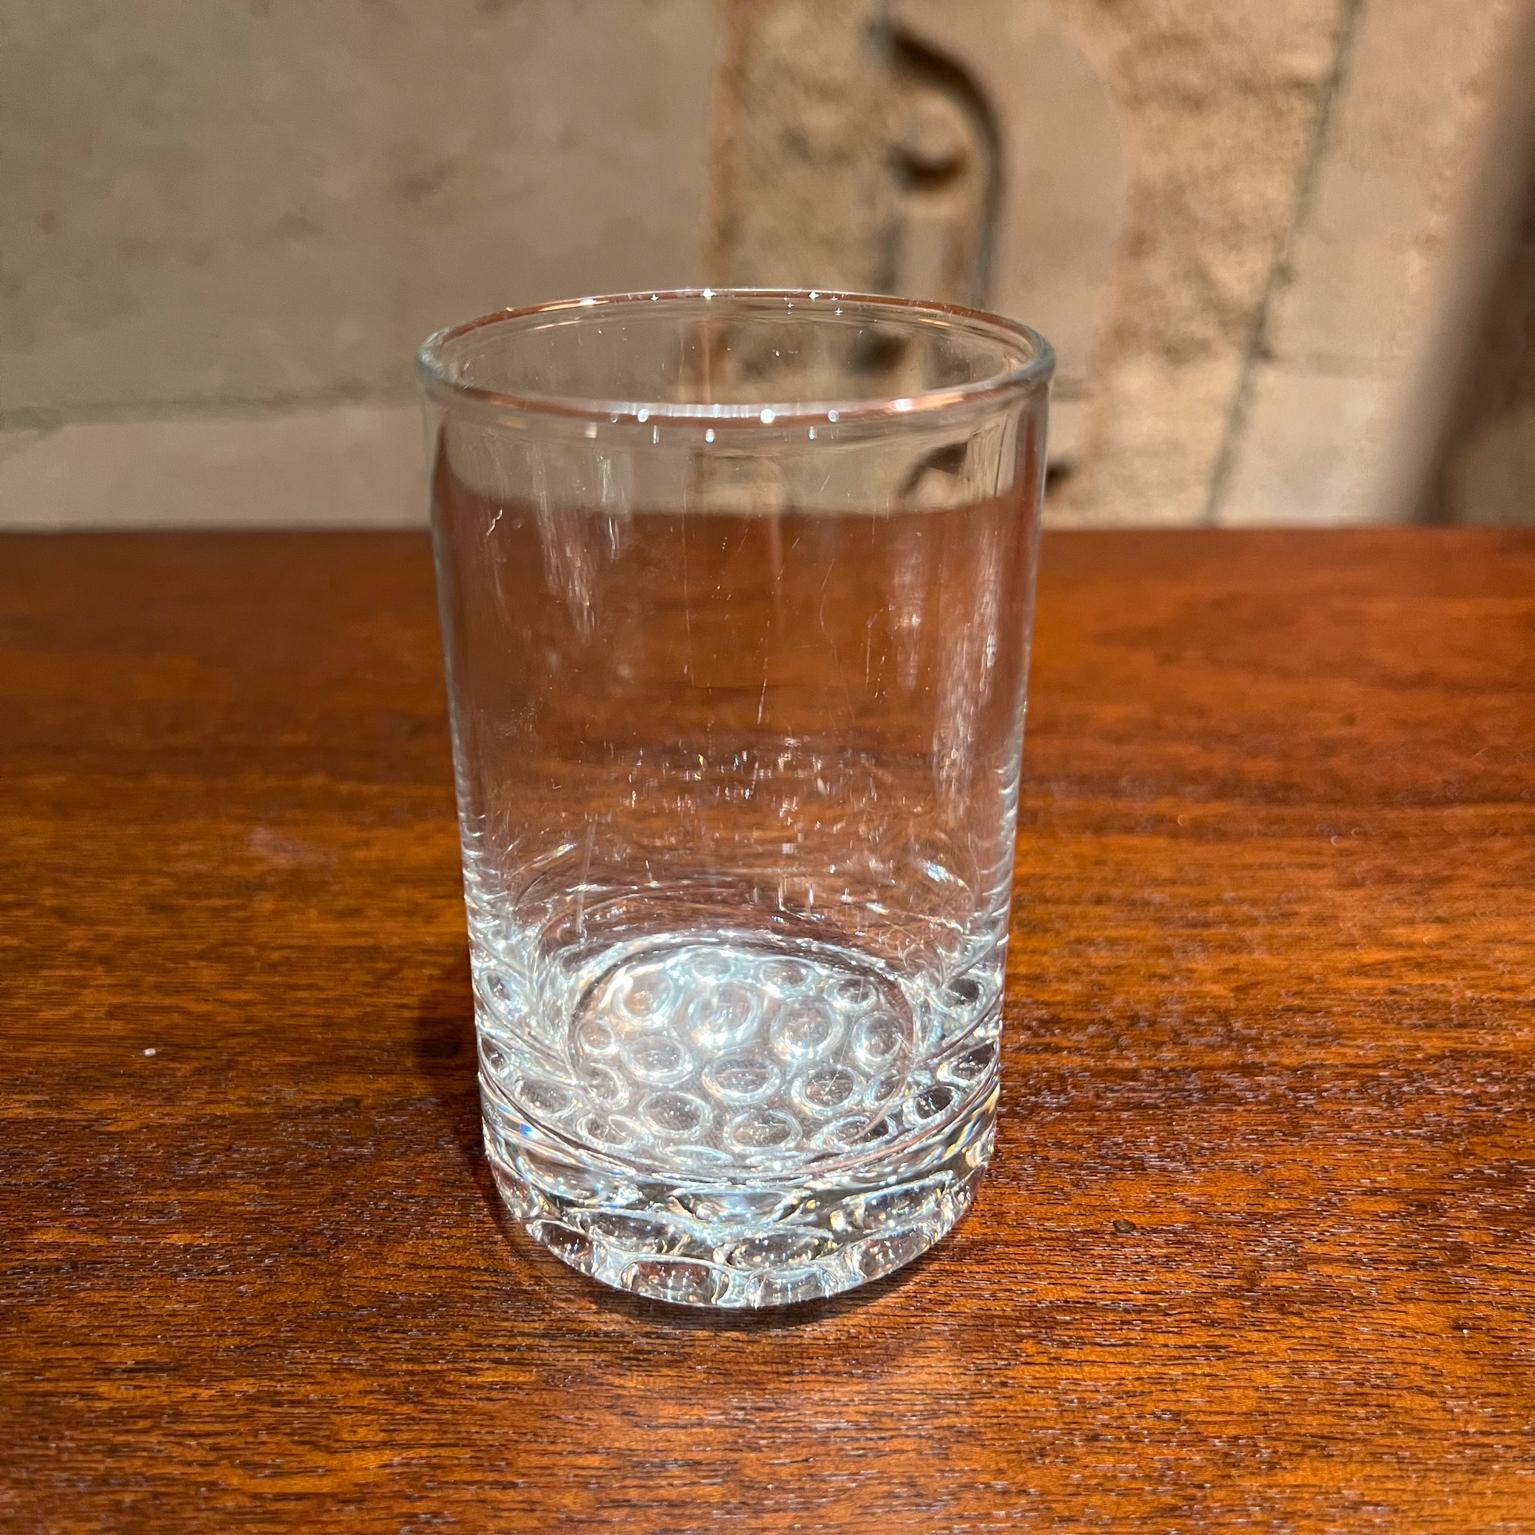 Set of four Scandinavian designed Drinking Glasses juice or whiskey barware
3.5 h x 2.25 diameter
No stamp from the maker. Very clean.
 In the style of Iittala
Preowned original vintage condition
Refer to images.